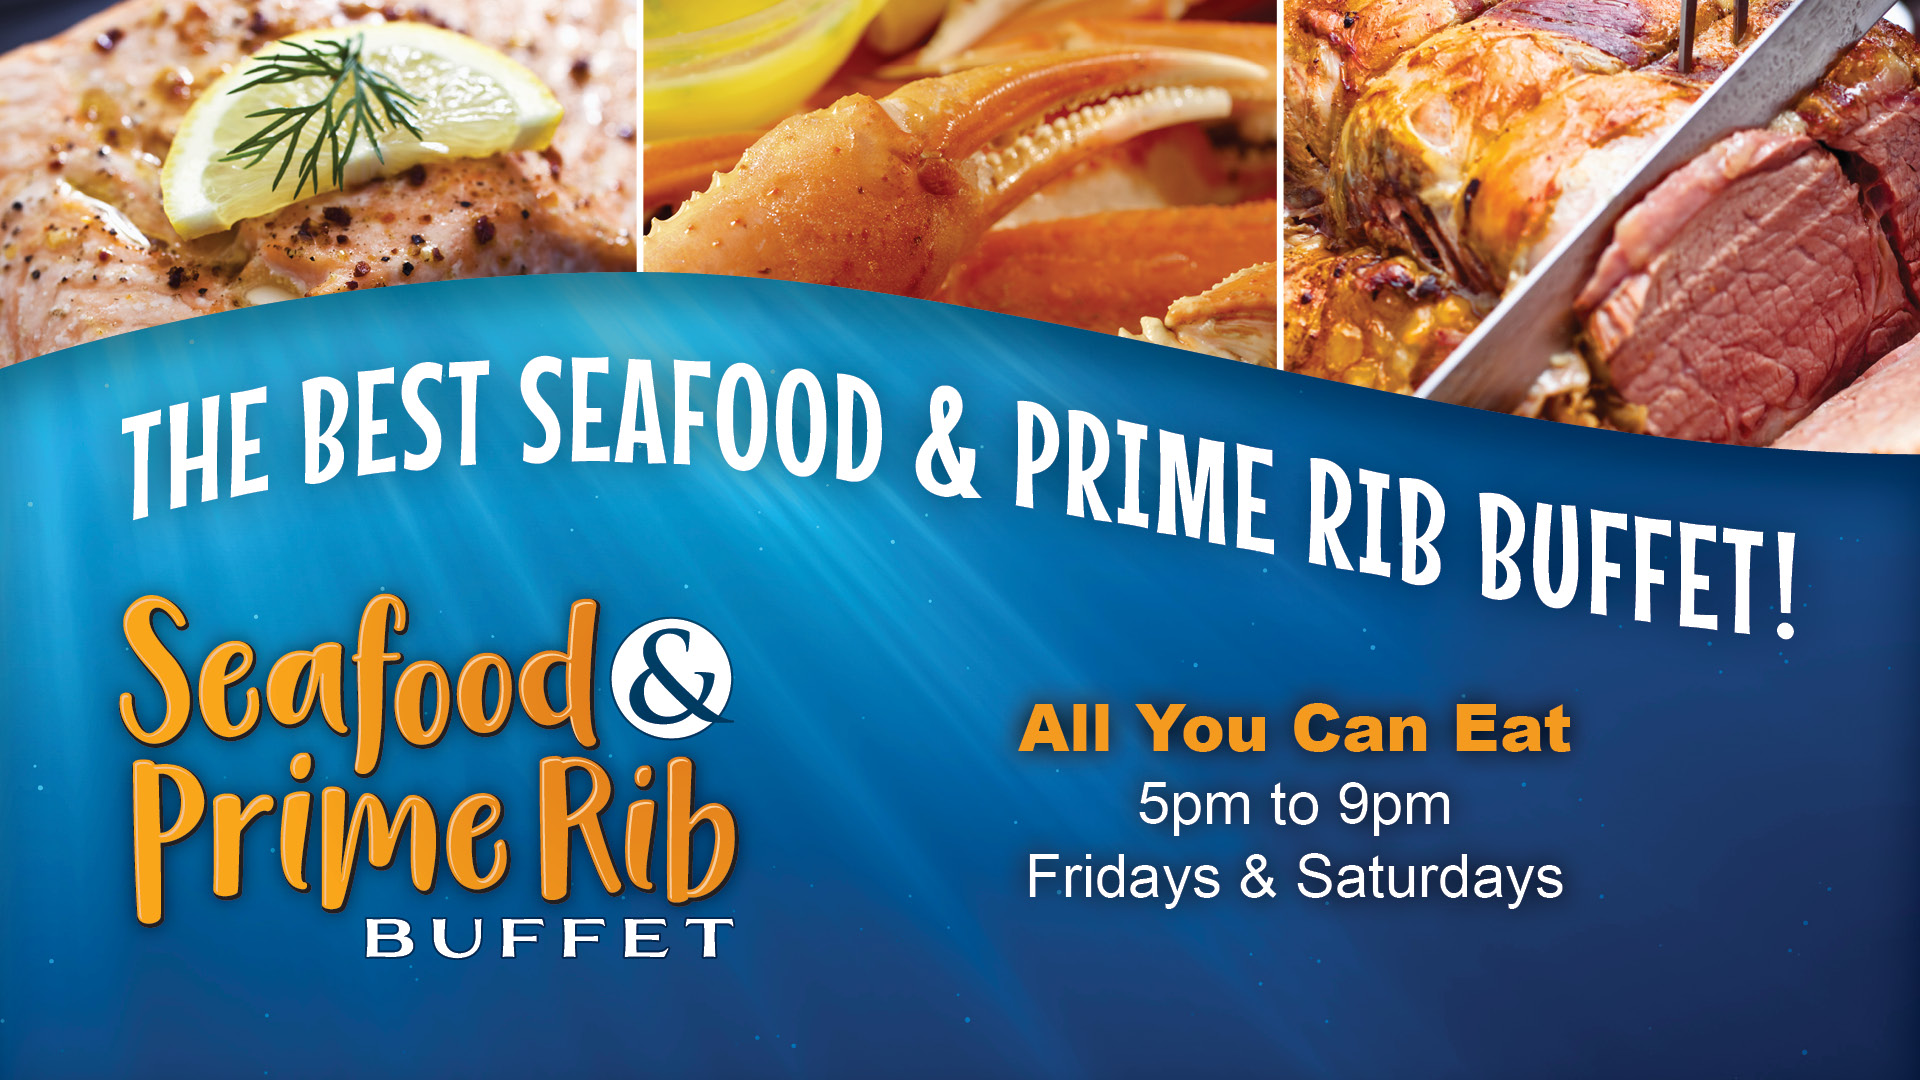 Seafood & Prime Rib Buffet - The best seafood & prime rib buffet! All You Can Eat. 5pm to 9pm Fridays & Saturdays